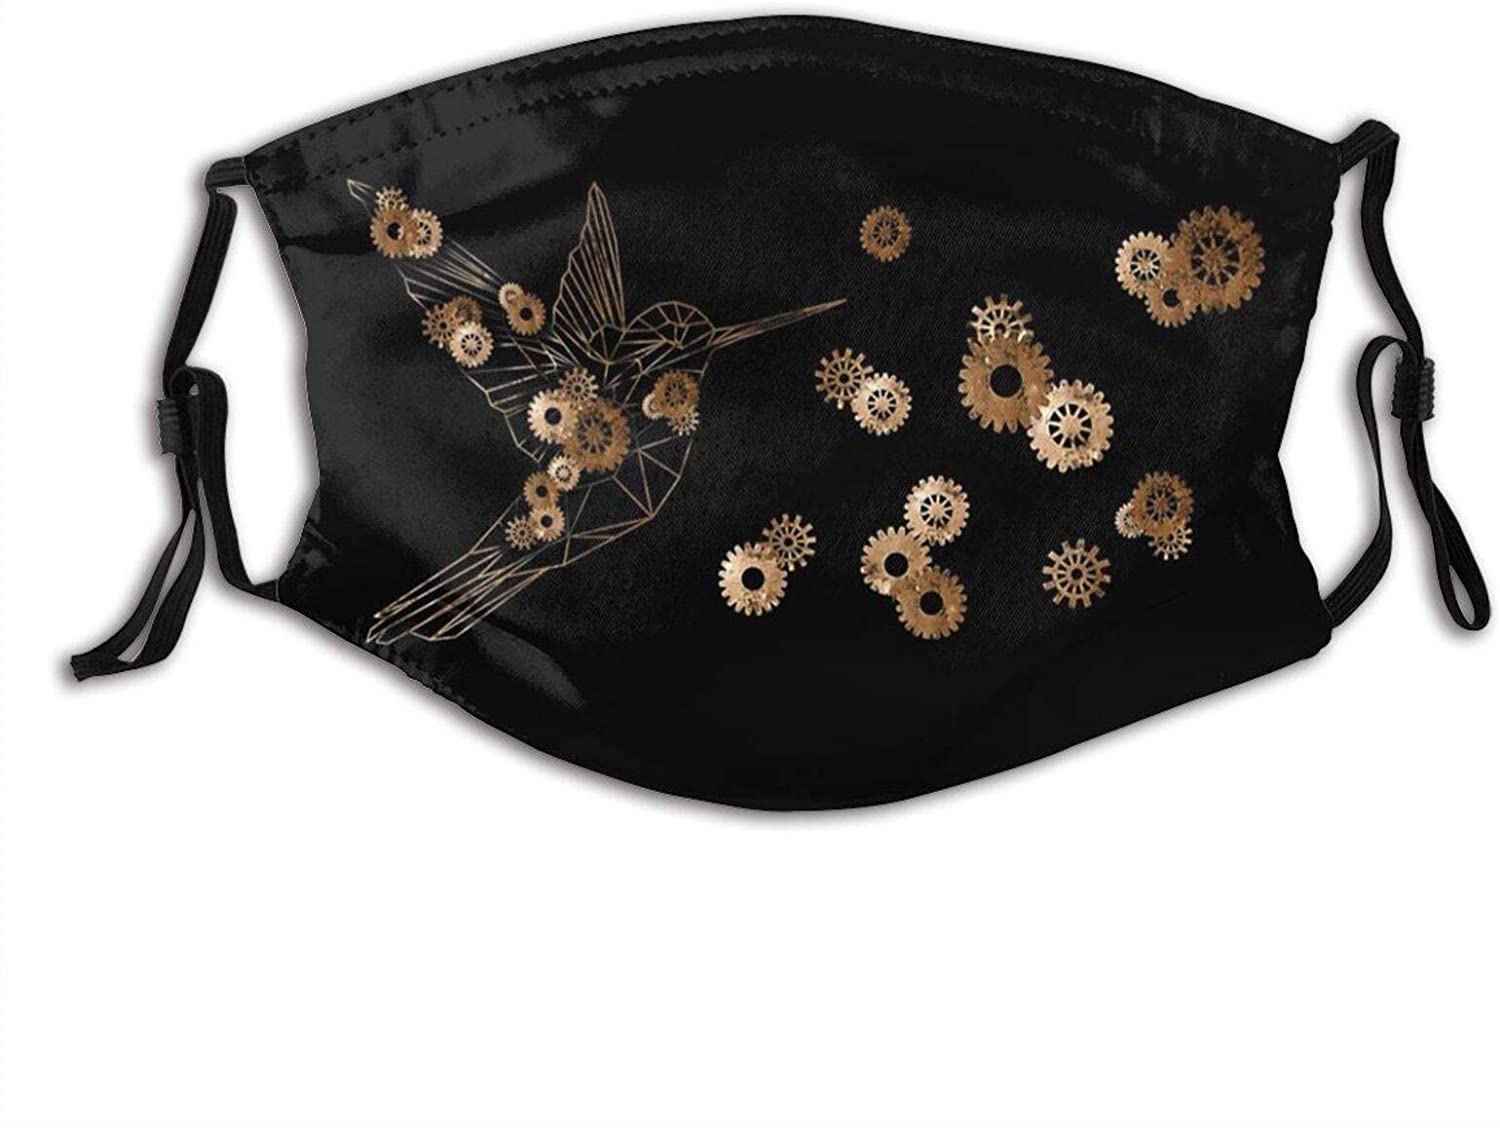 Steampunk Grunge Textures Comfortable Reusable Face Mask, Adjustable Scarf For Adult (With 2 Filters) - Golden Steampunk Bird